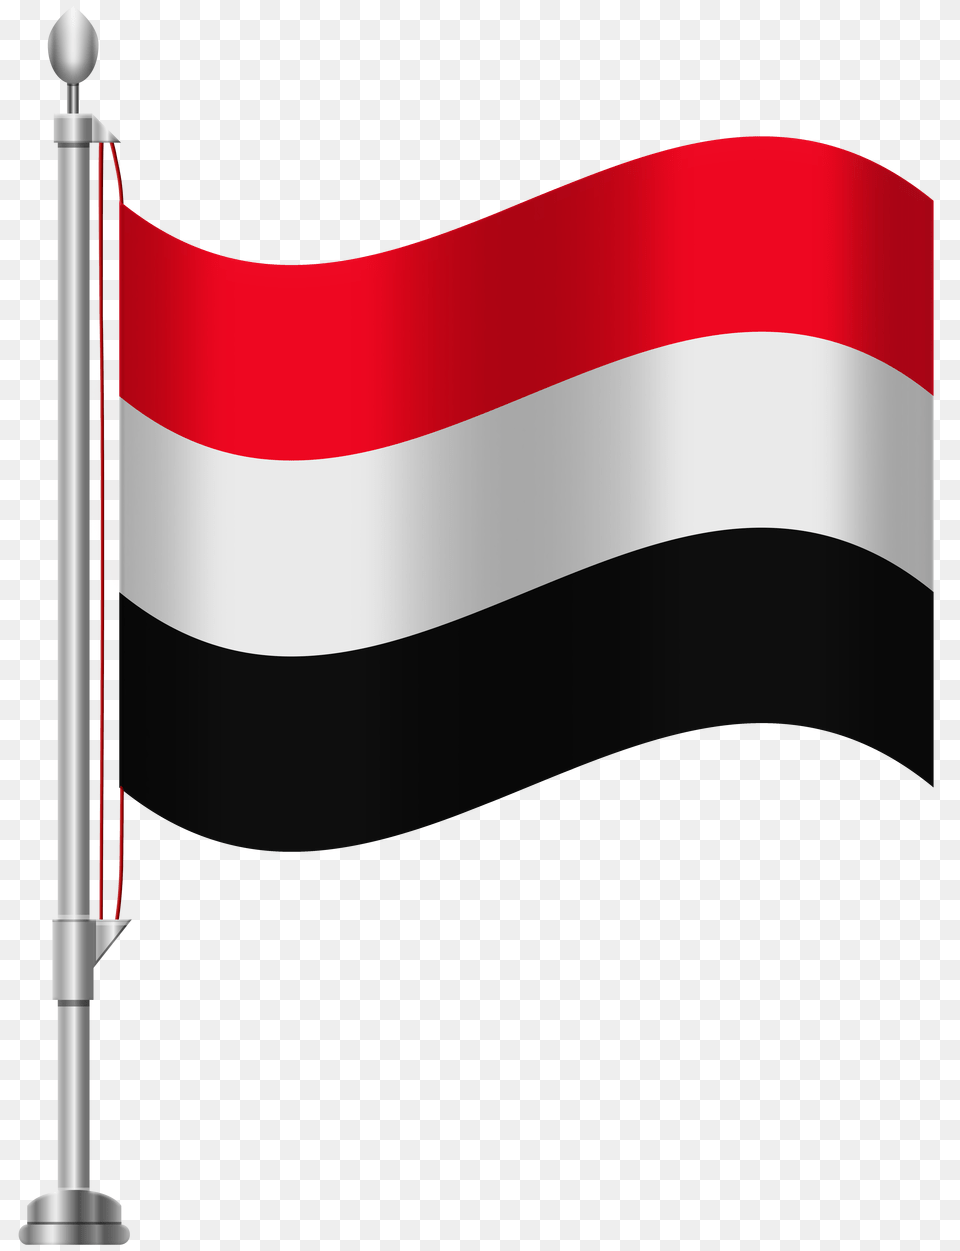 Flag Clipart Black And White Philippine Flag Clipart Black, Smoke Pipe Free Transparent Png